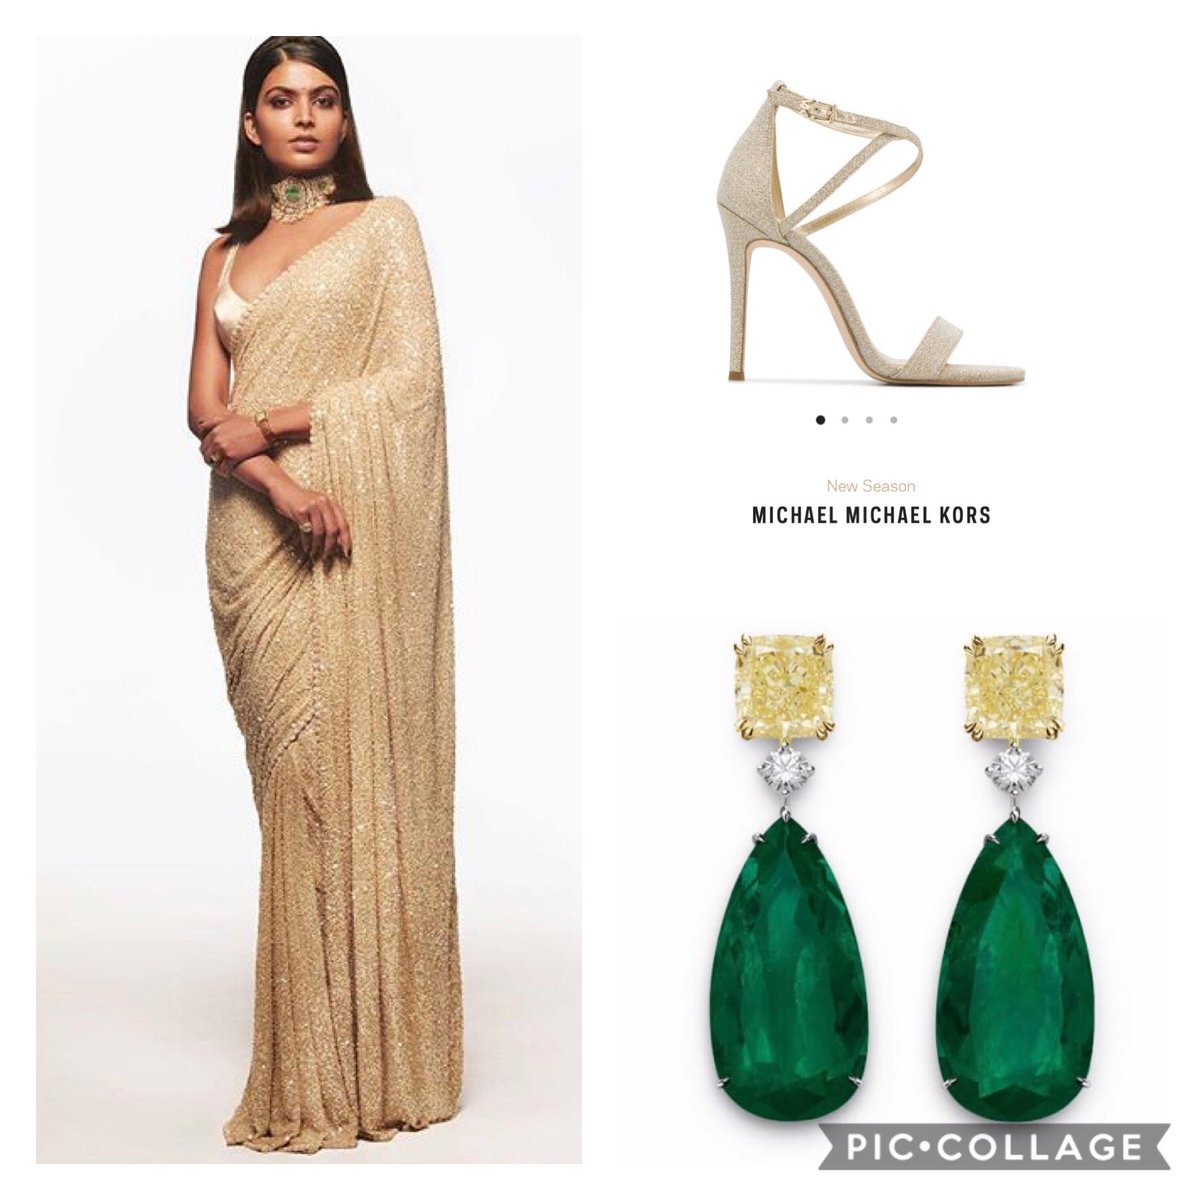 Cannes 2020 Wishlist (hypothetical) threadDeepika Padukone for the Chopard PartyThis Sabya is not as dramatic, but I want to see a saree look at Cannes that’s not OTT ghunghat or pallu or nose ring. Just a classic saree with these nude heels and Chopard emerald earrings.